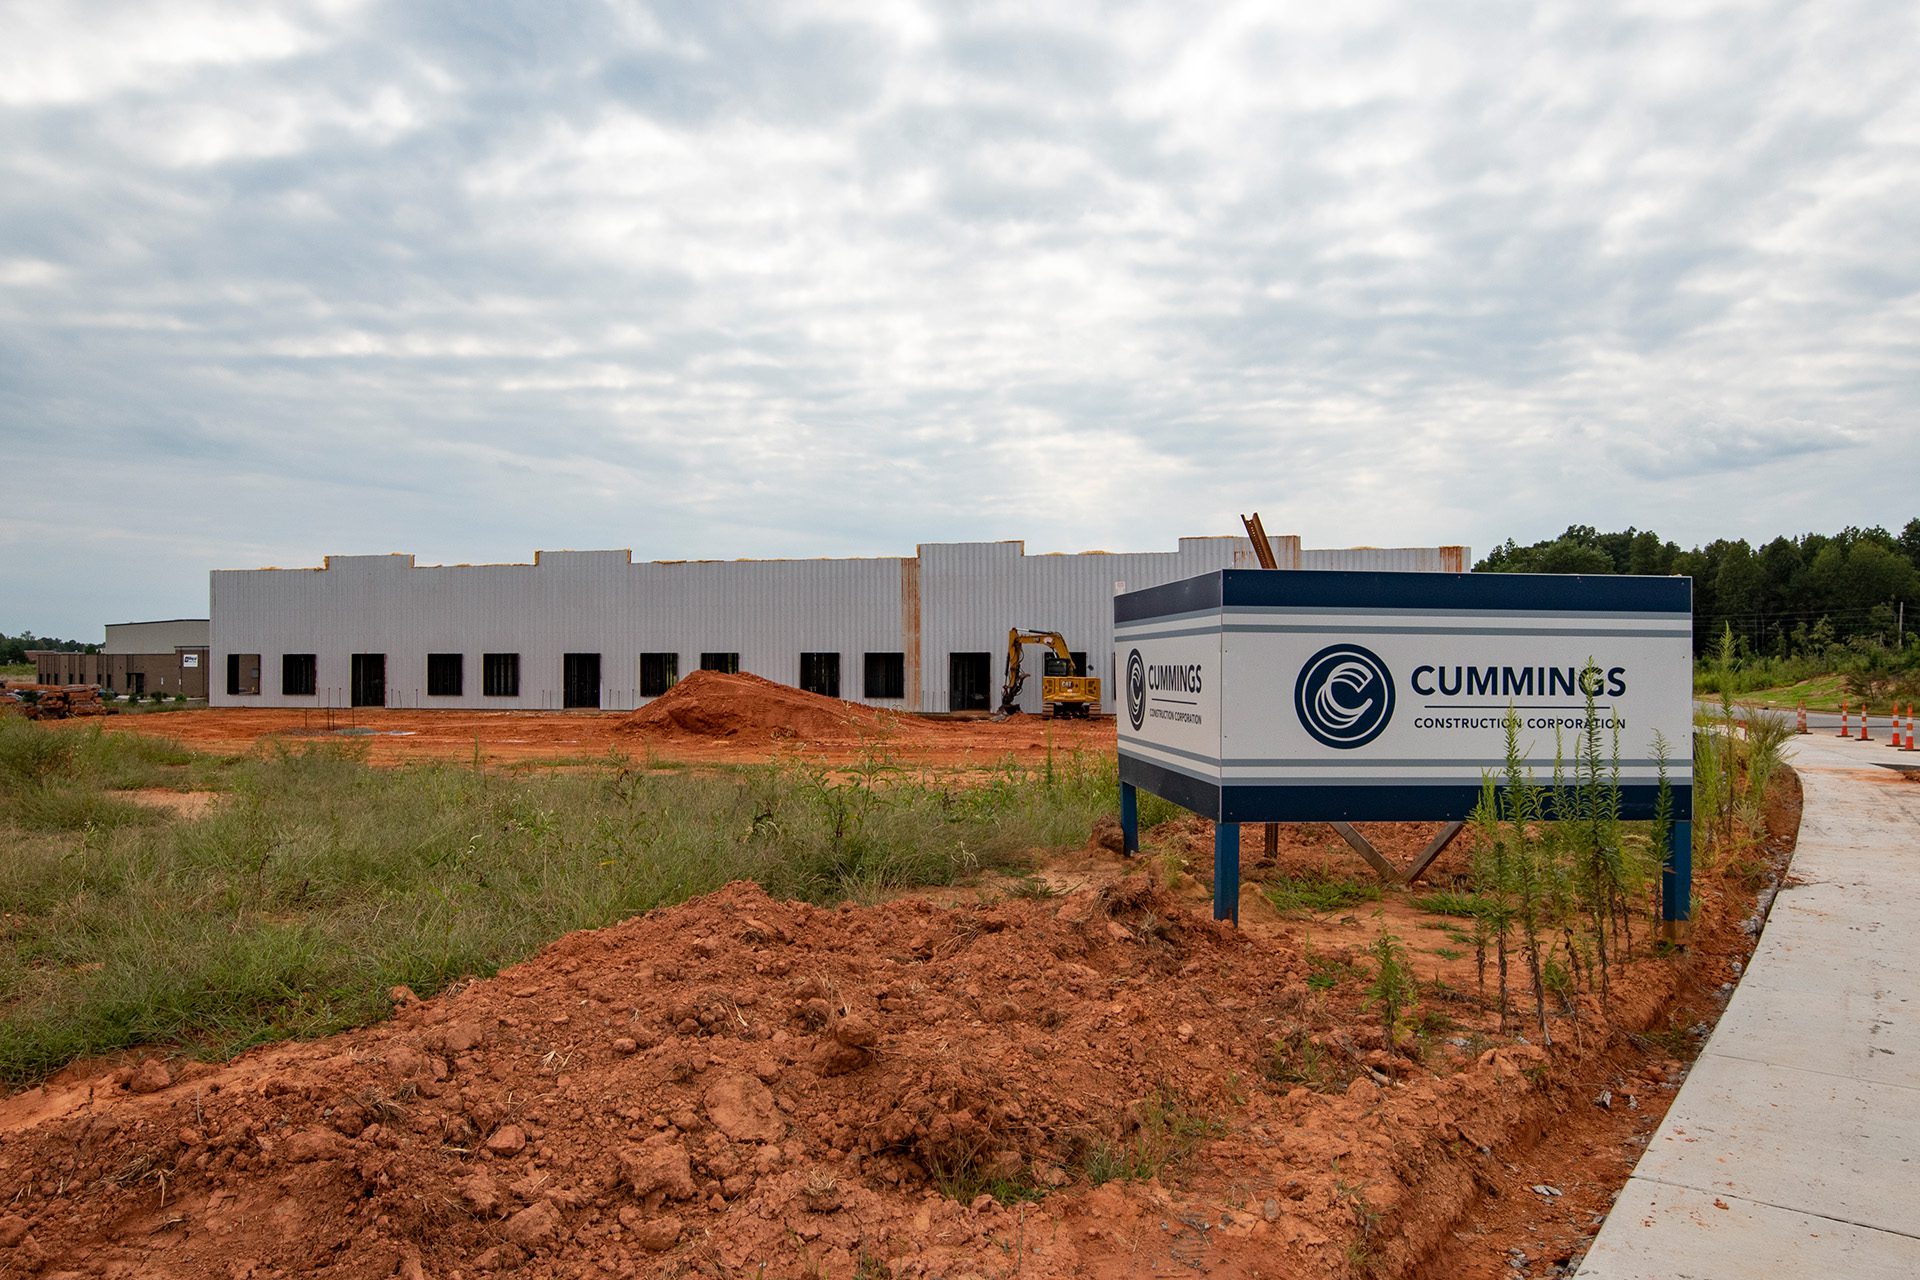 Clear Creek industrial flex building under construction with red dirt in foreground and a Cummings sign on site